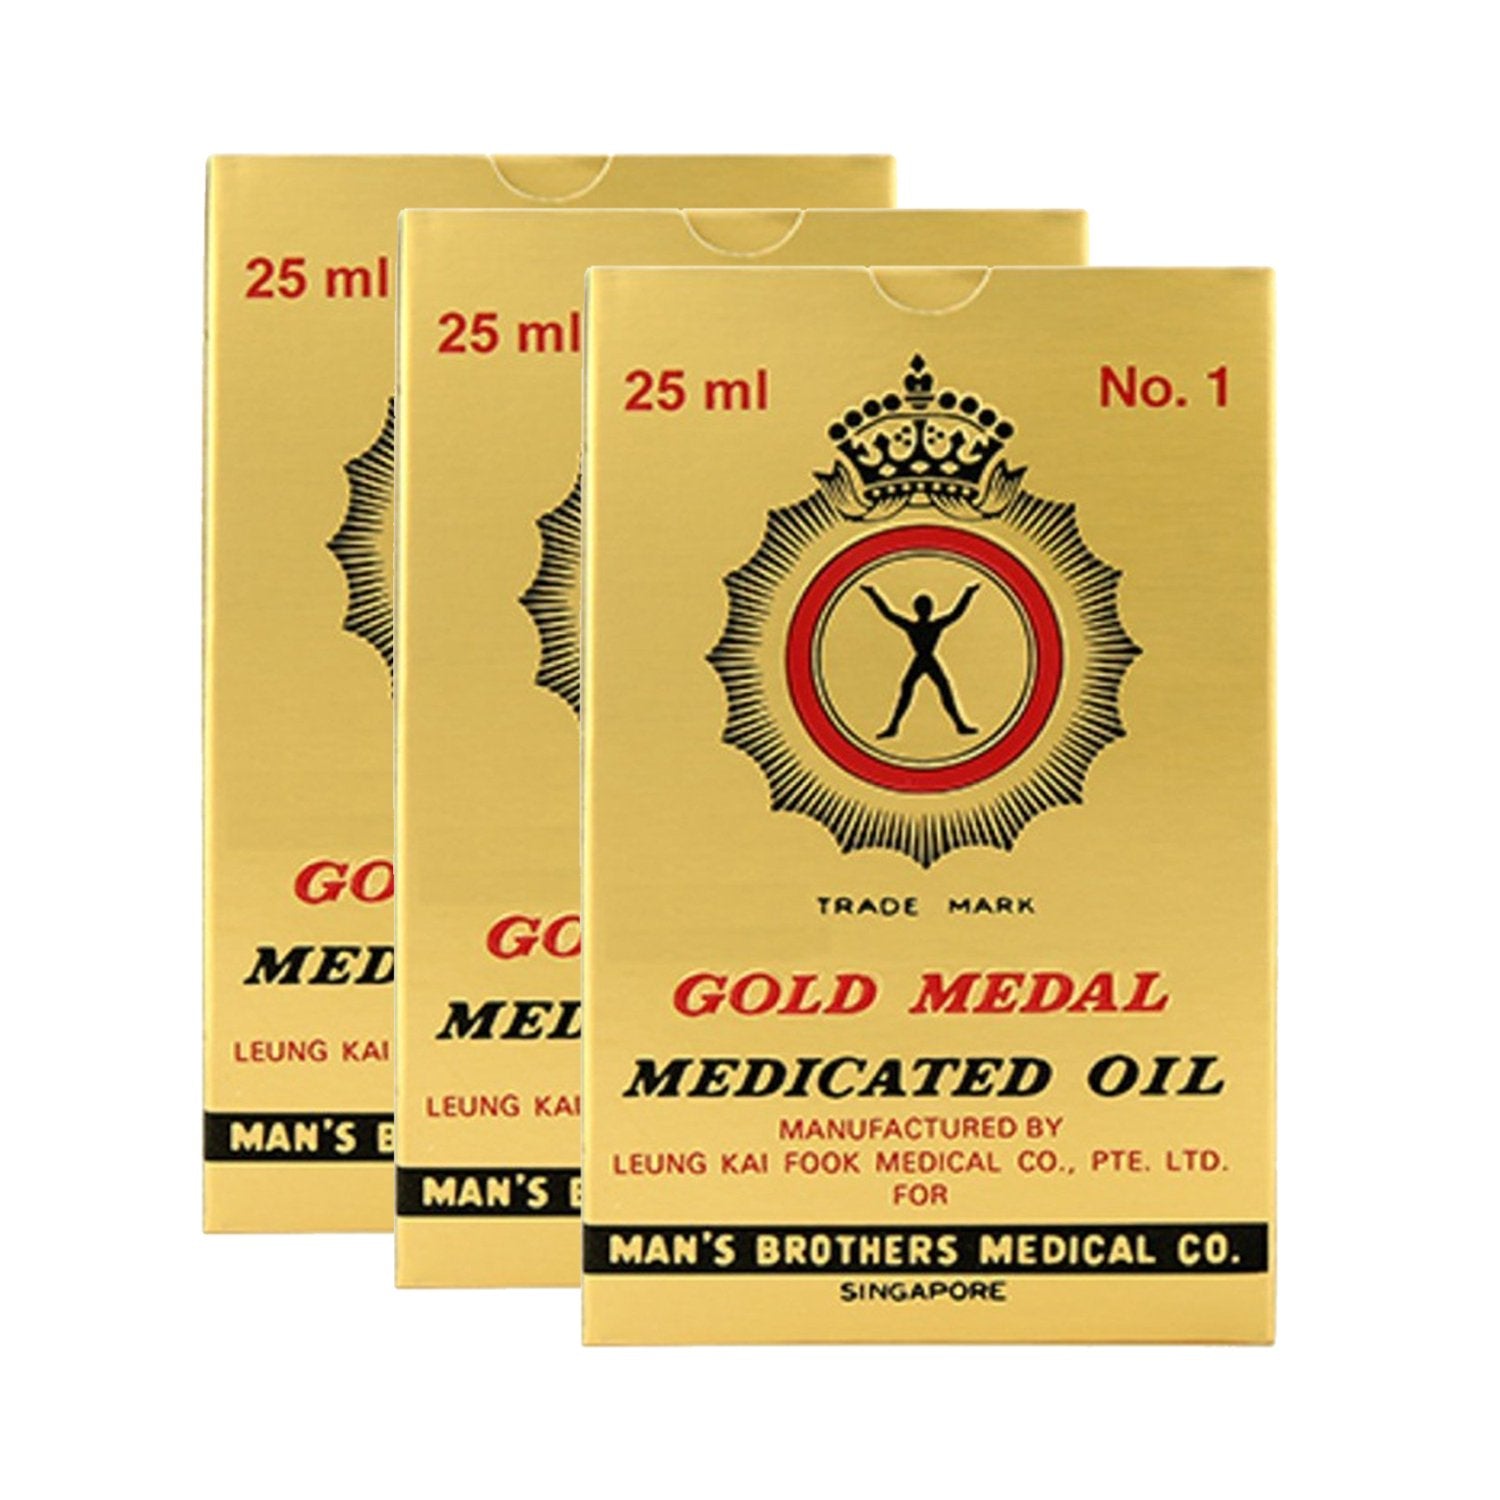 Gold Medal Medicated Oil Pain relief with refreshing aroma - 25ml - Sabkhareedo.com